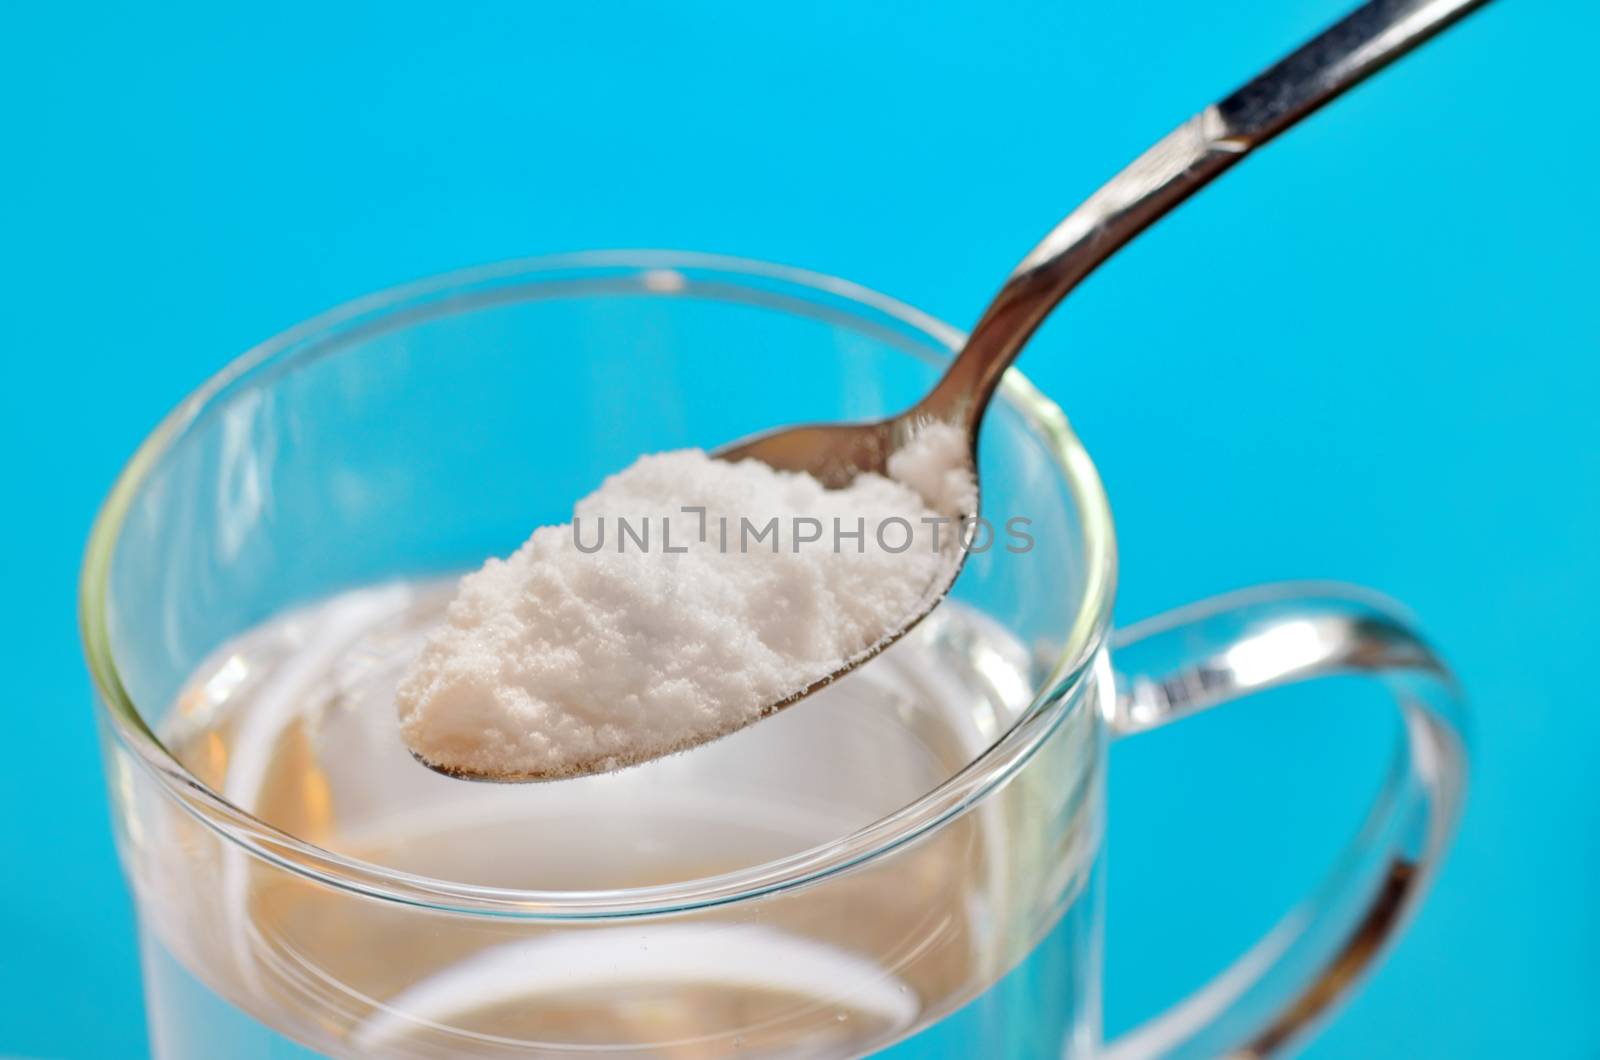 Spoon of baking soda over glass of water on blue background